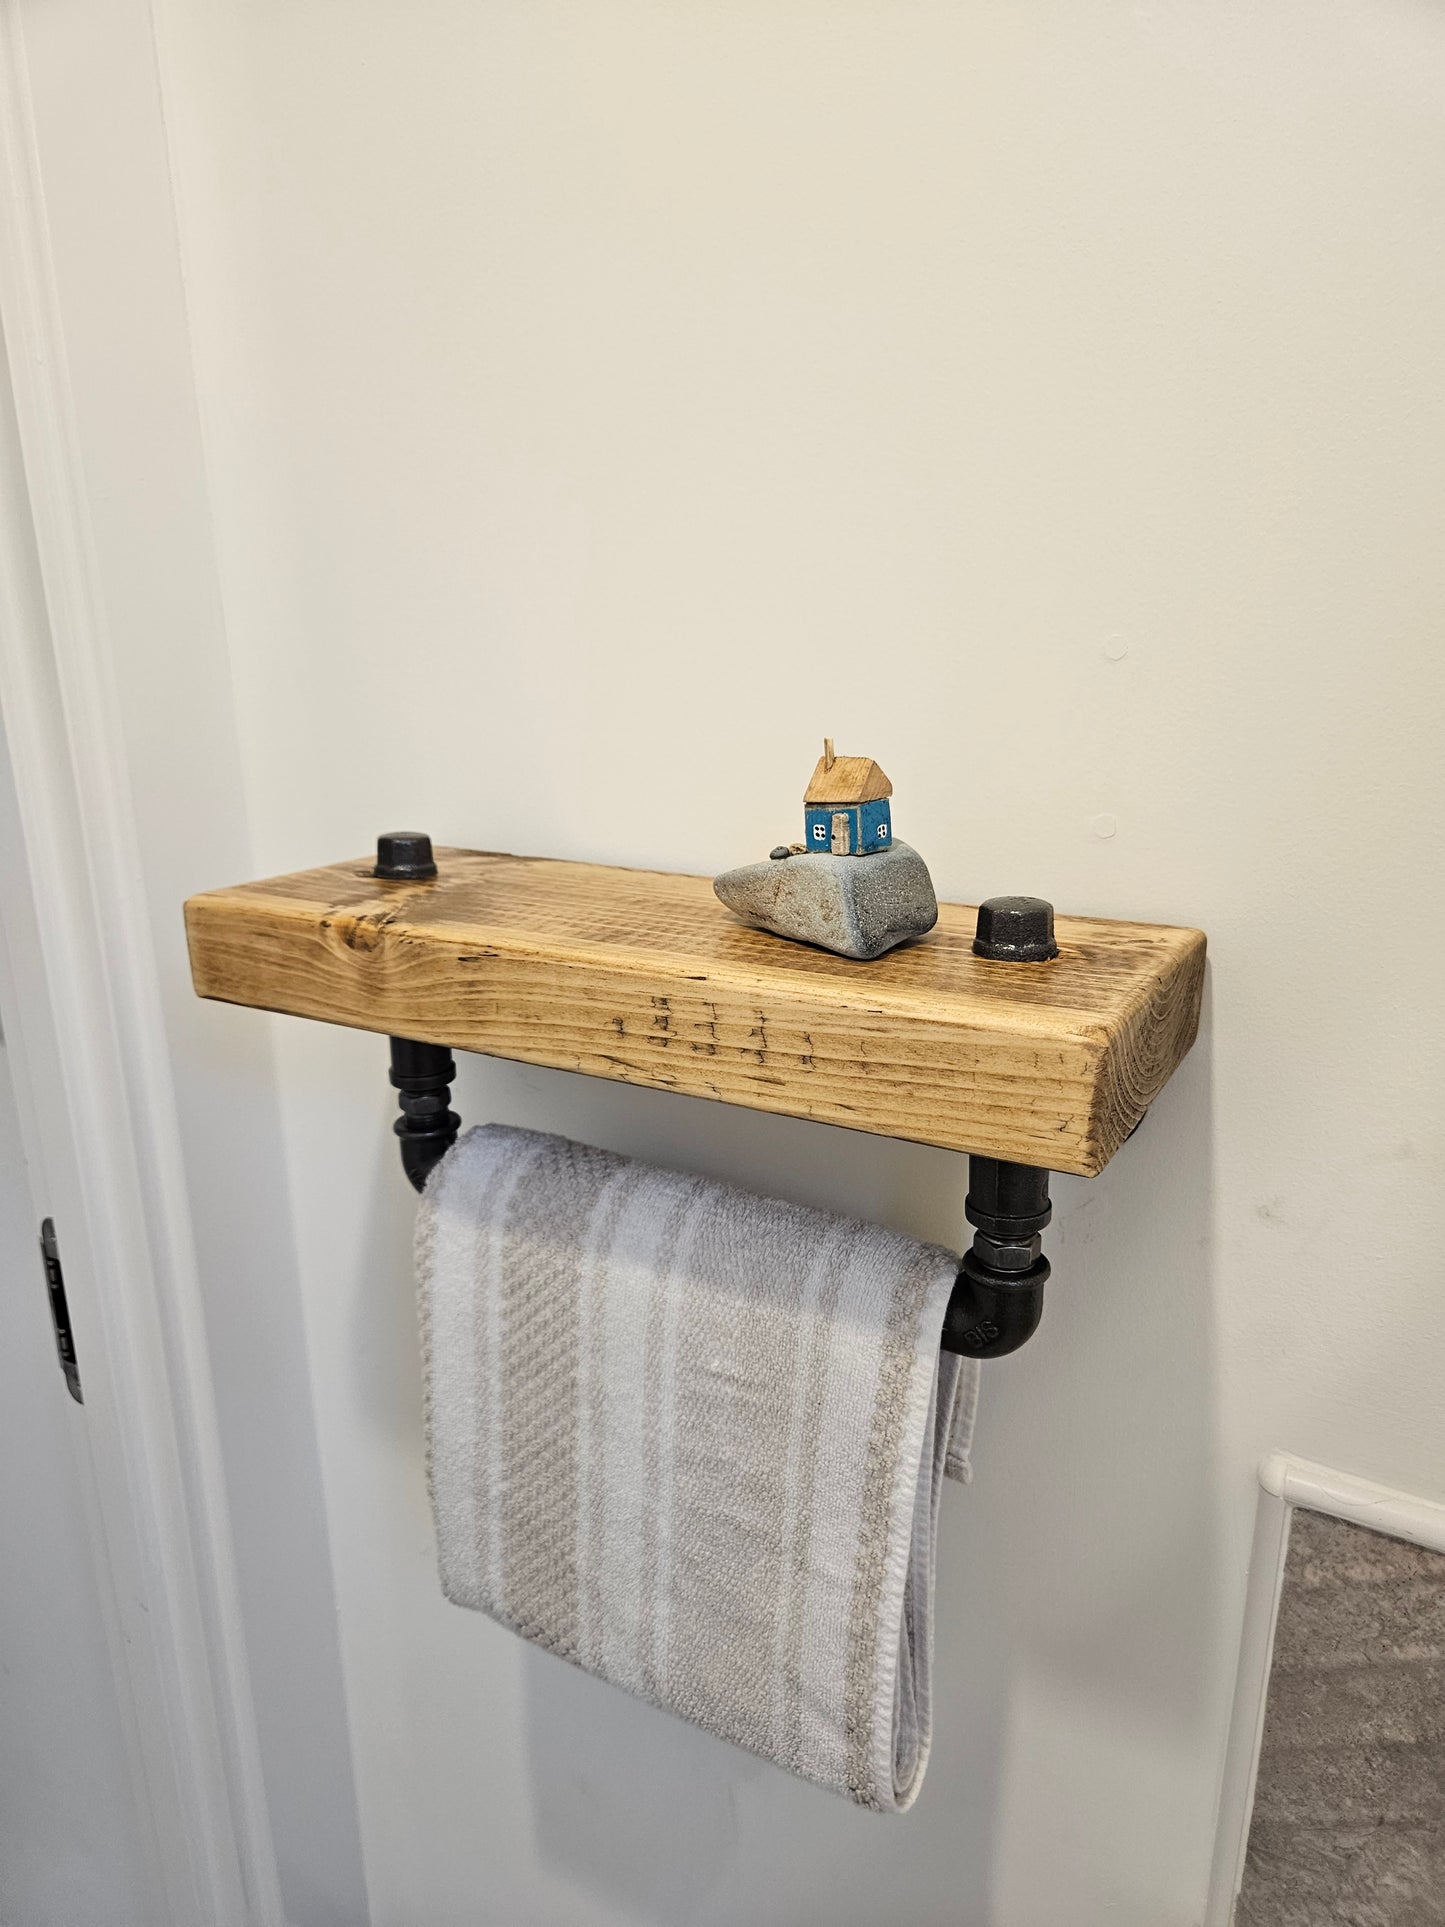 Shelving unit with towel holder